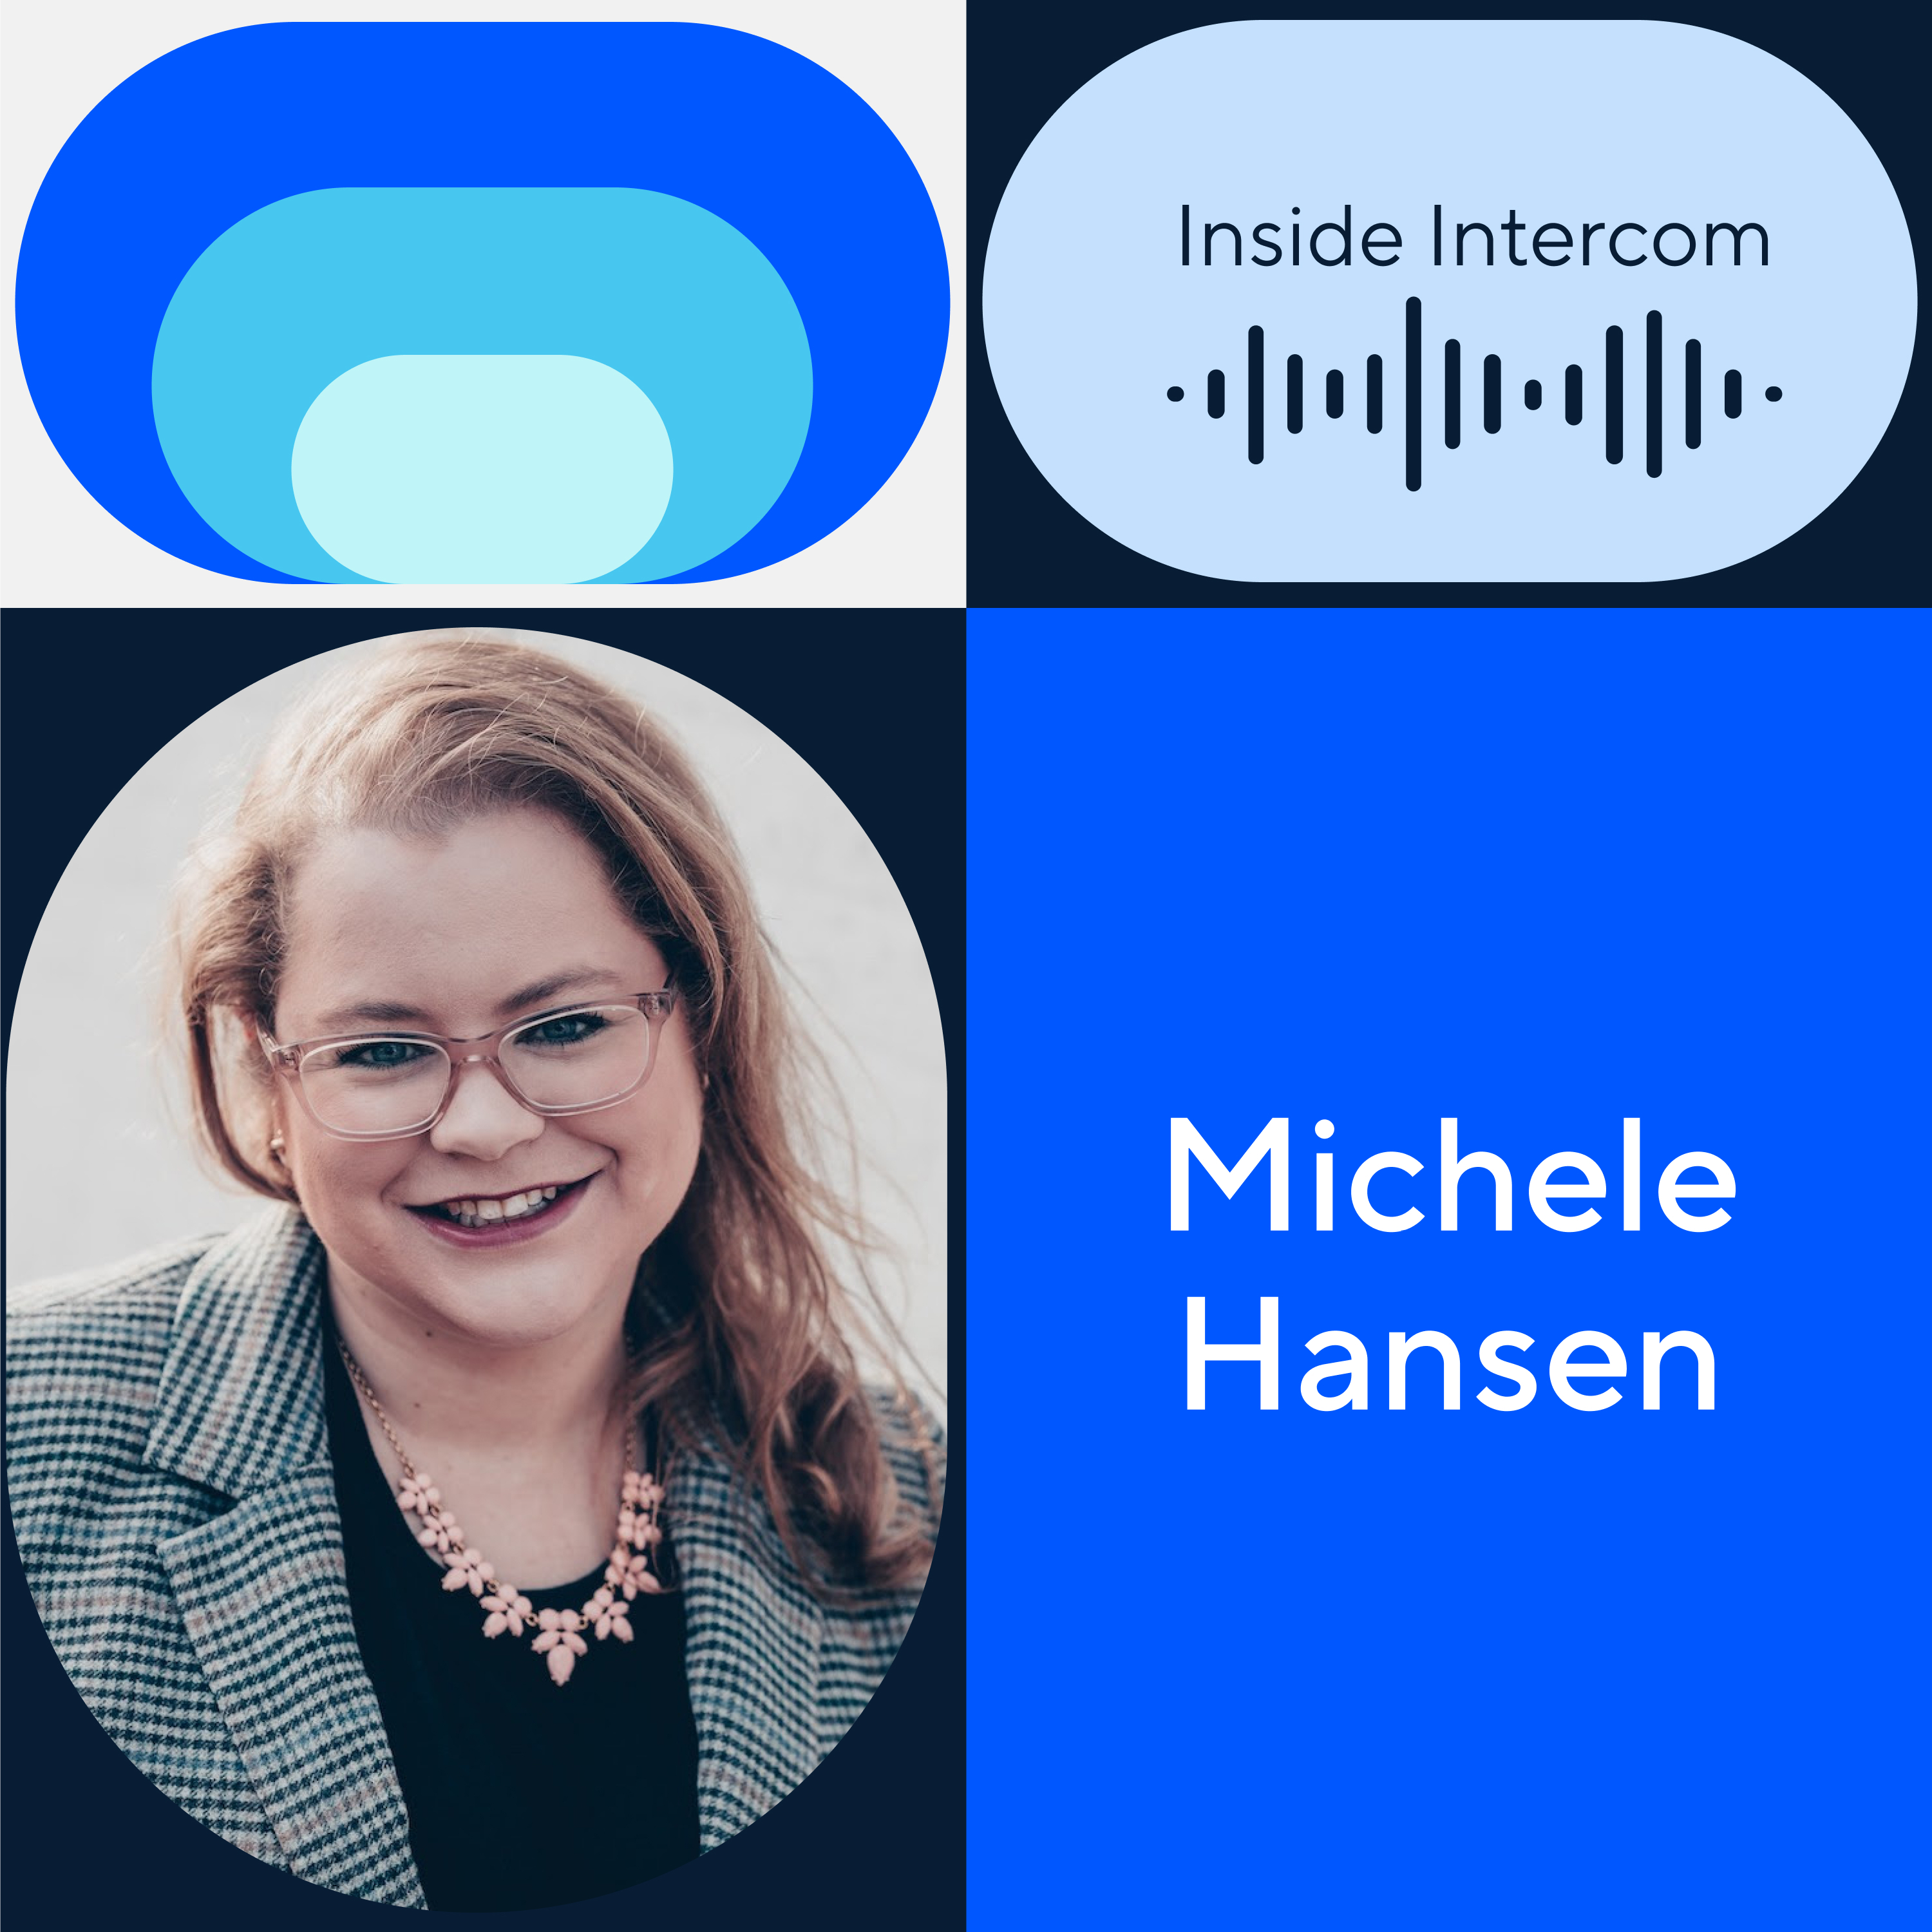 How to deploy empathy to get the most out of customer interviews, according to Geocodio's Michele Hansen